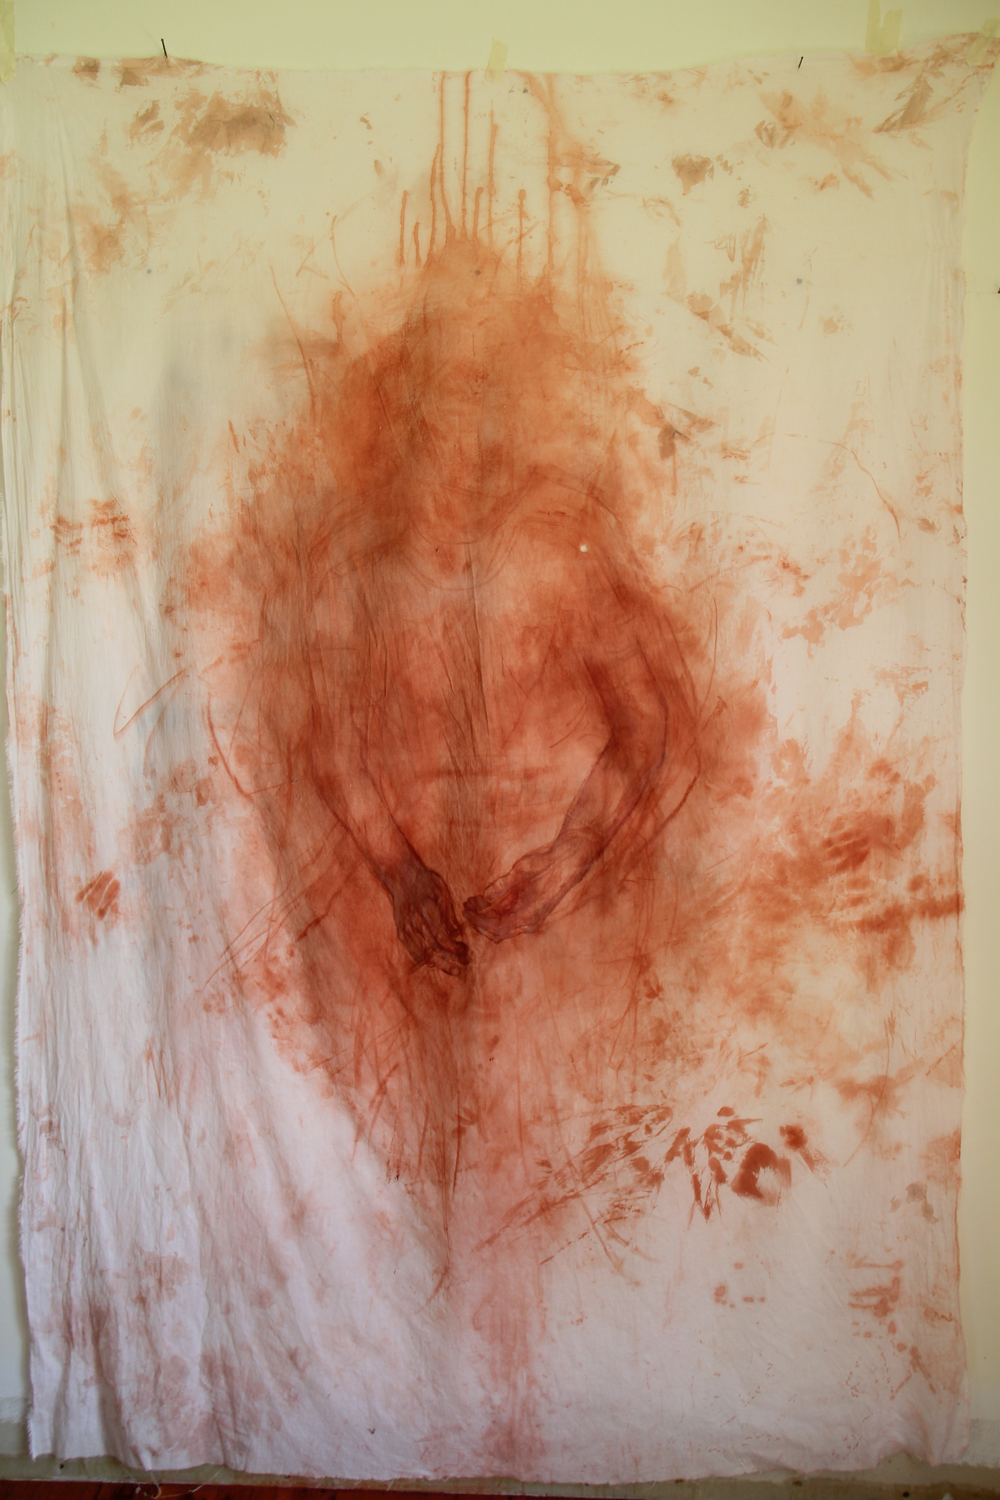 figurative painting, abstract lines, marks and smudges surround a pair of hands, the colours are warm toned reds and pinks